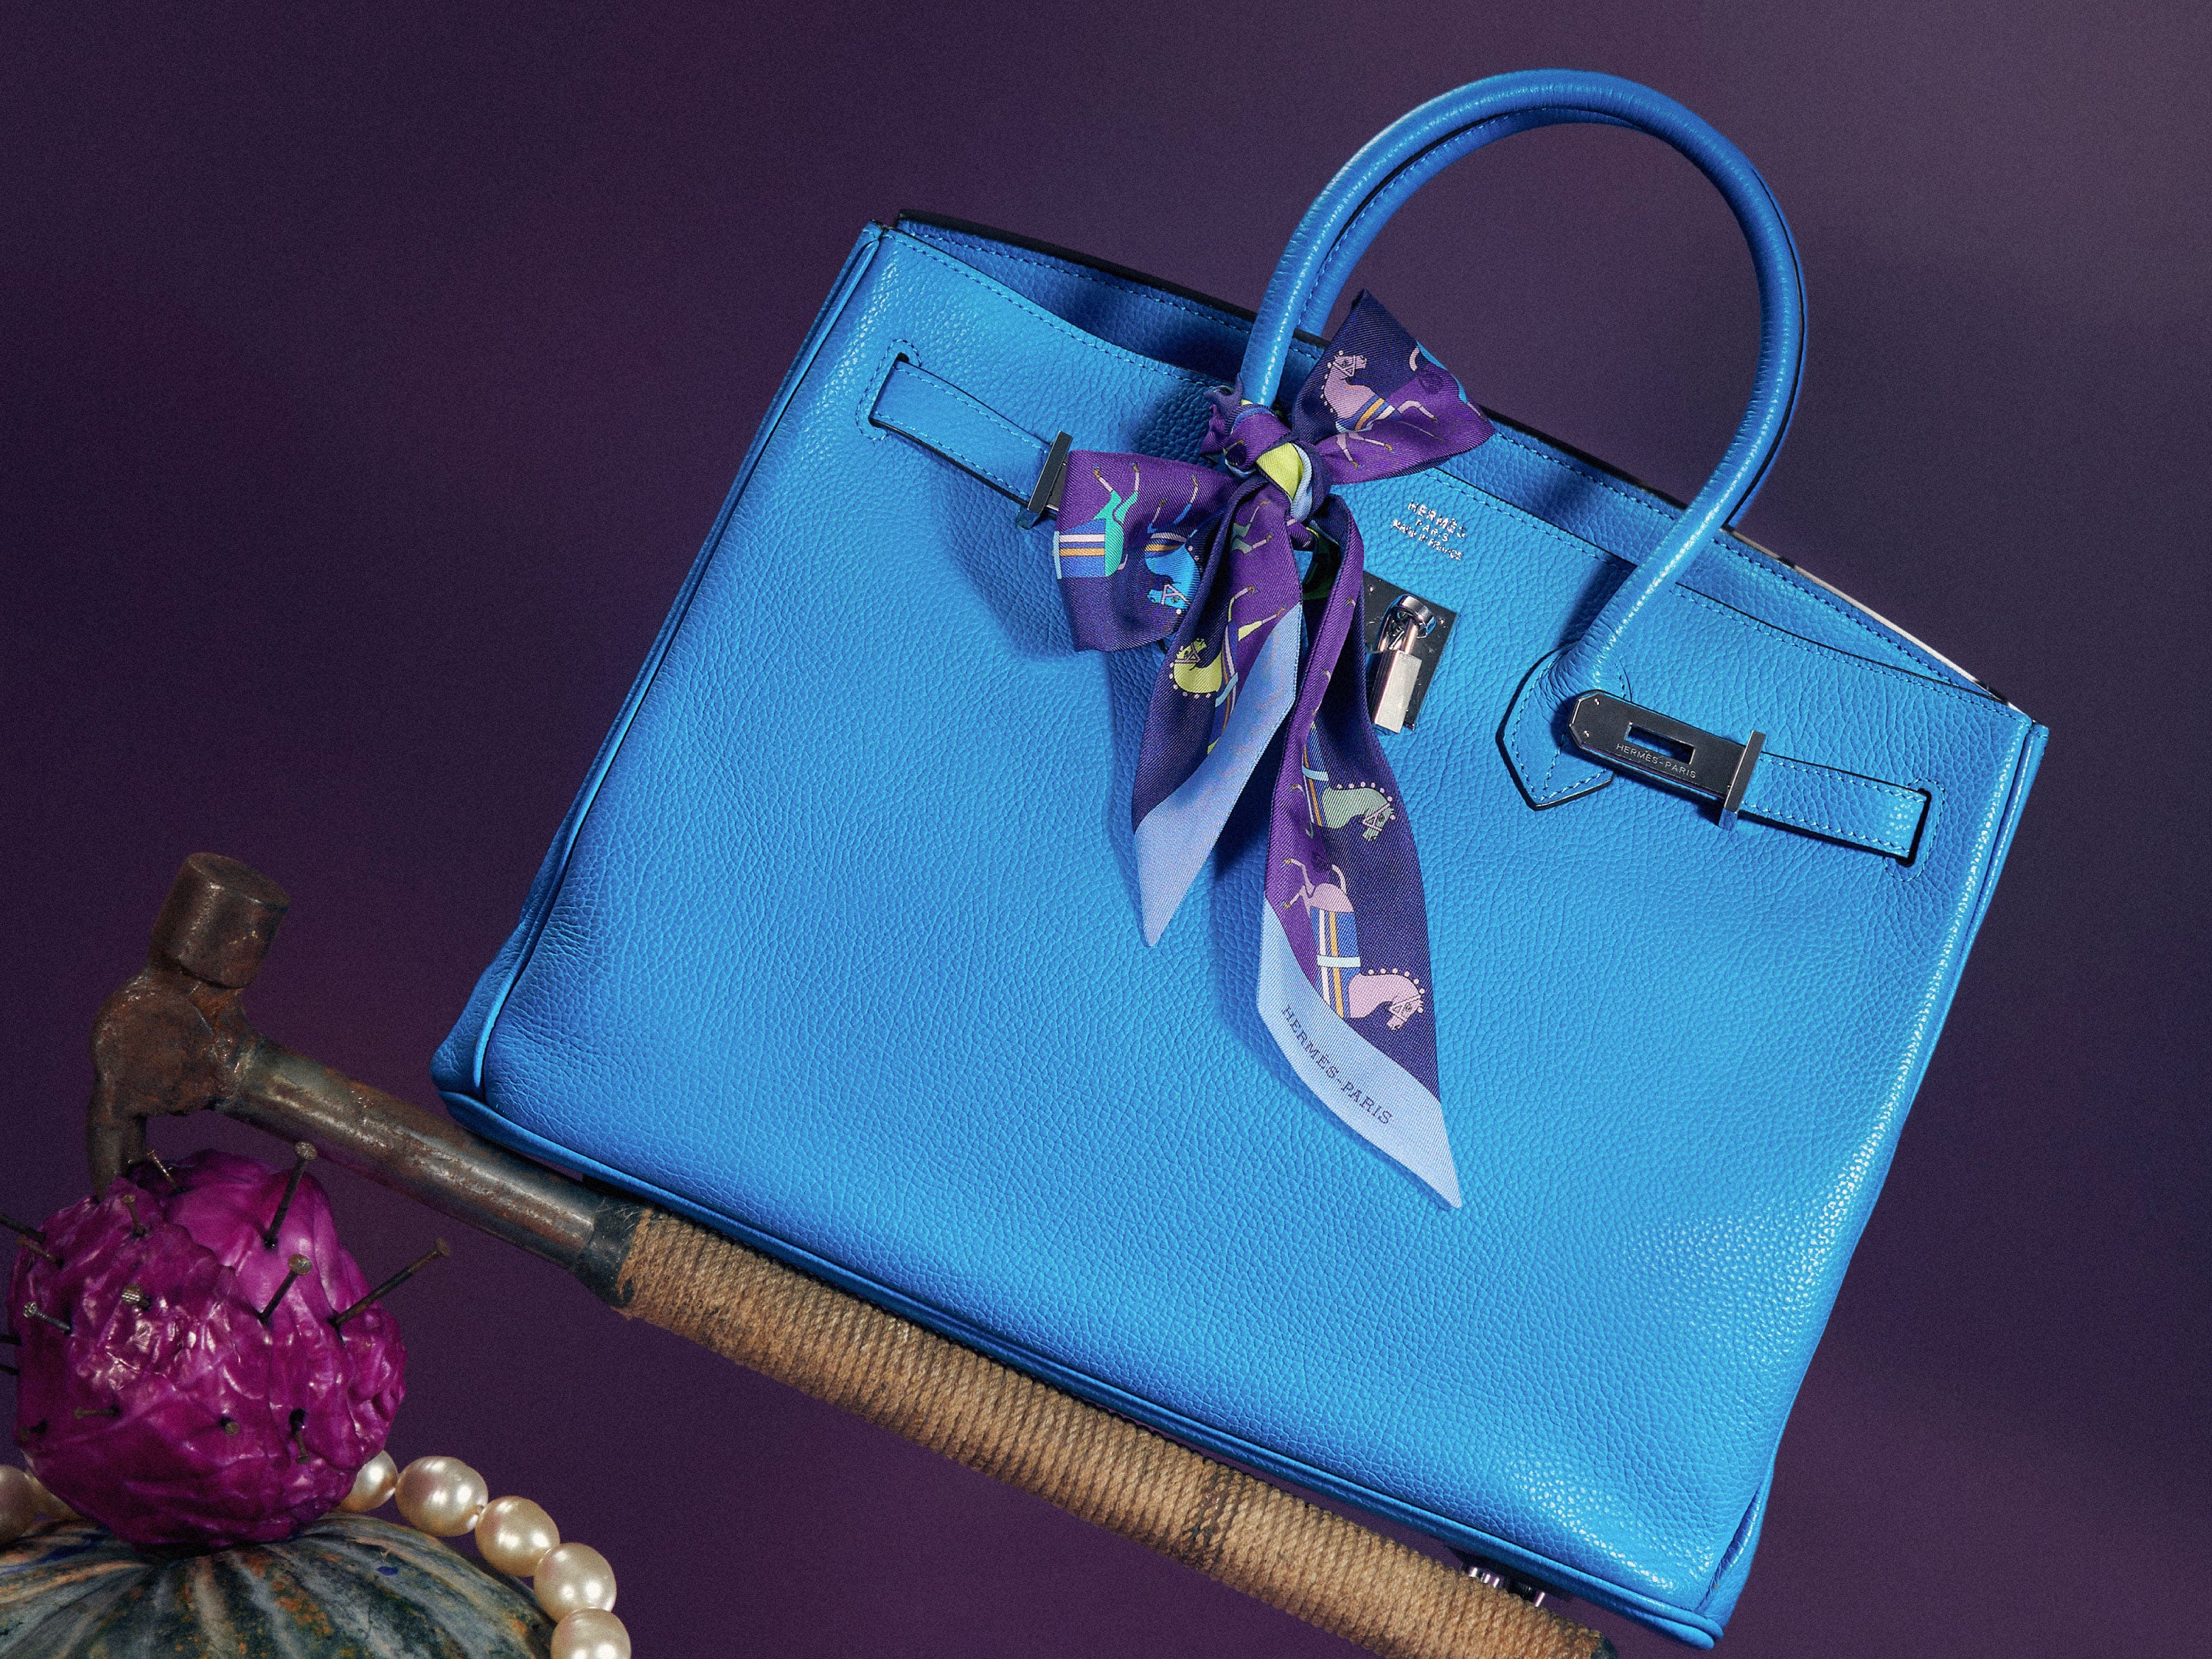 Luxury As You Know It: The Most Expensive Handbag Brands In The World